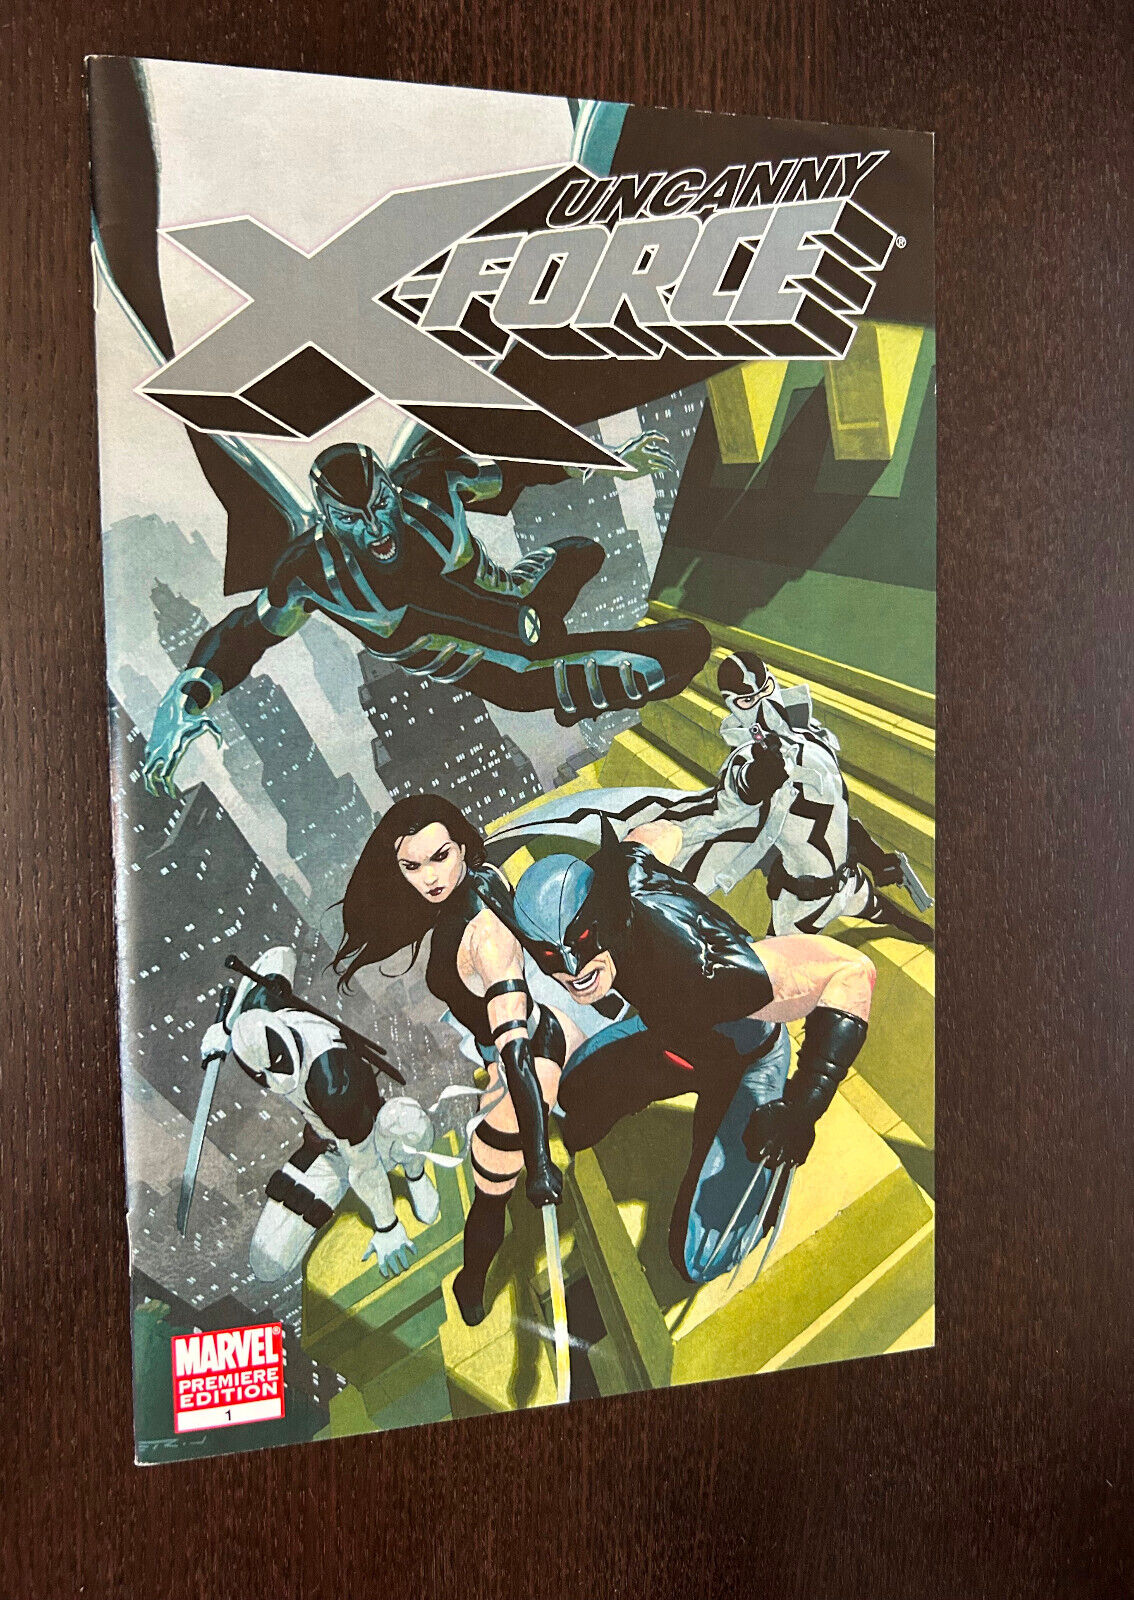 UNCANNY X-FORCE #1 (Marvel 2010) -- Premiere Edition Variant -- Technical FN